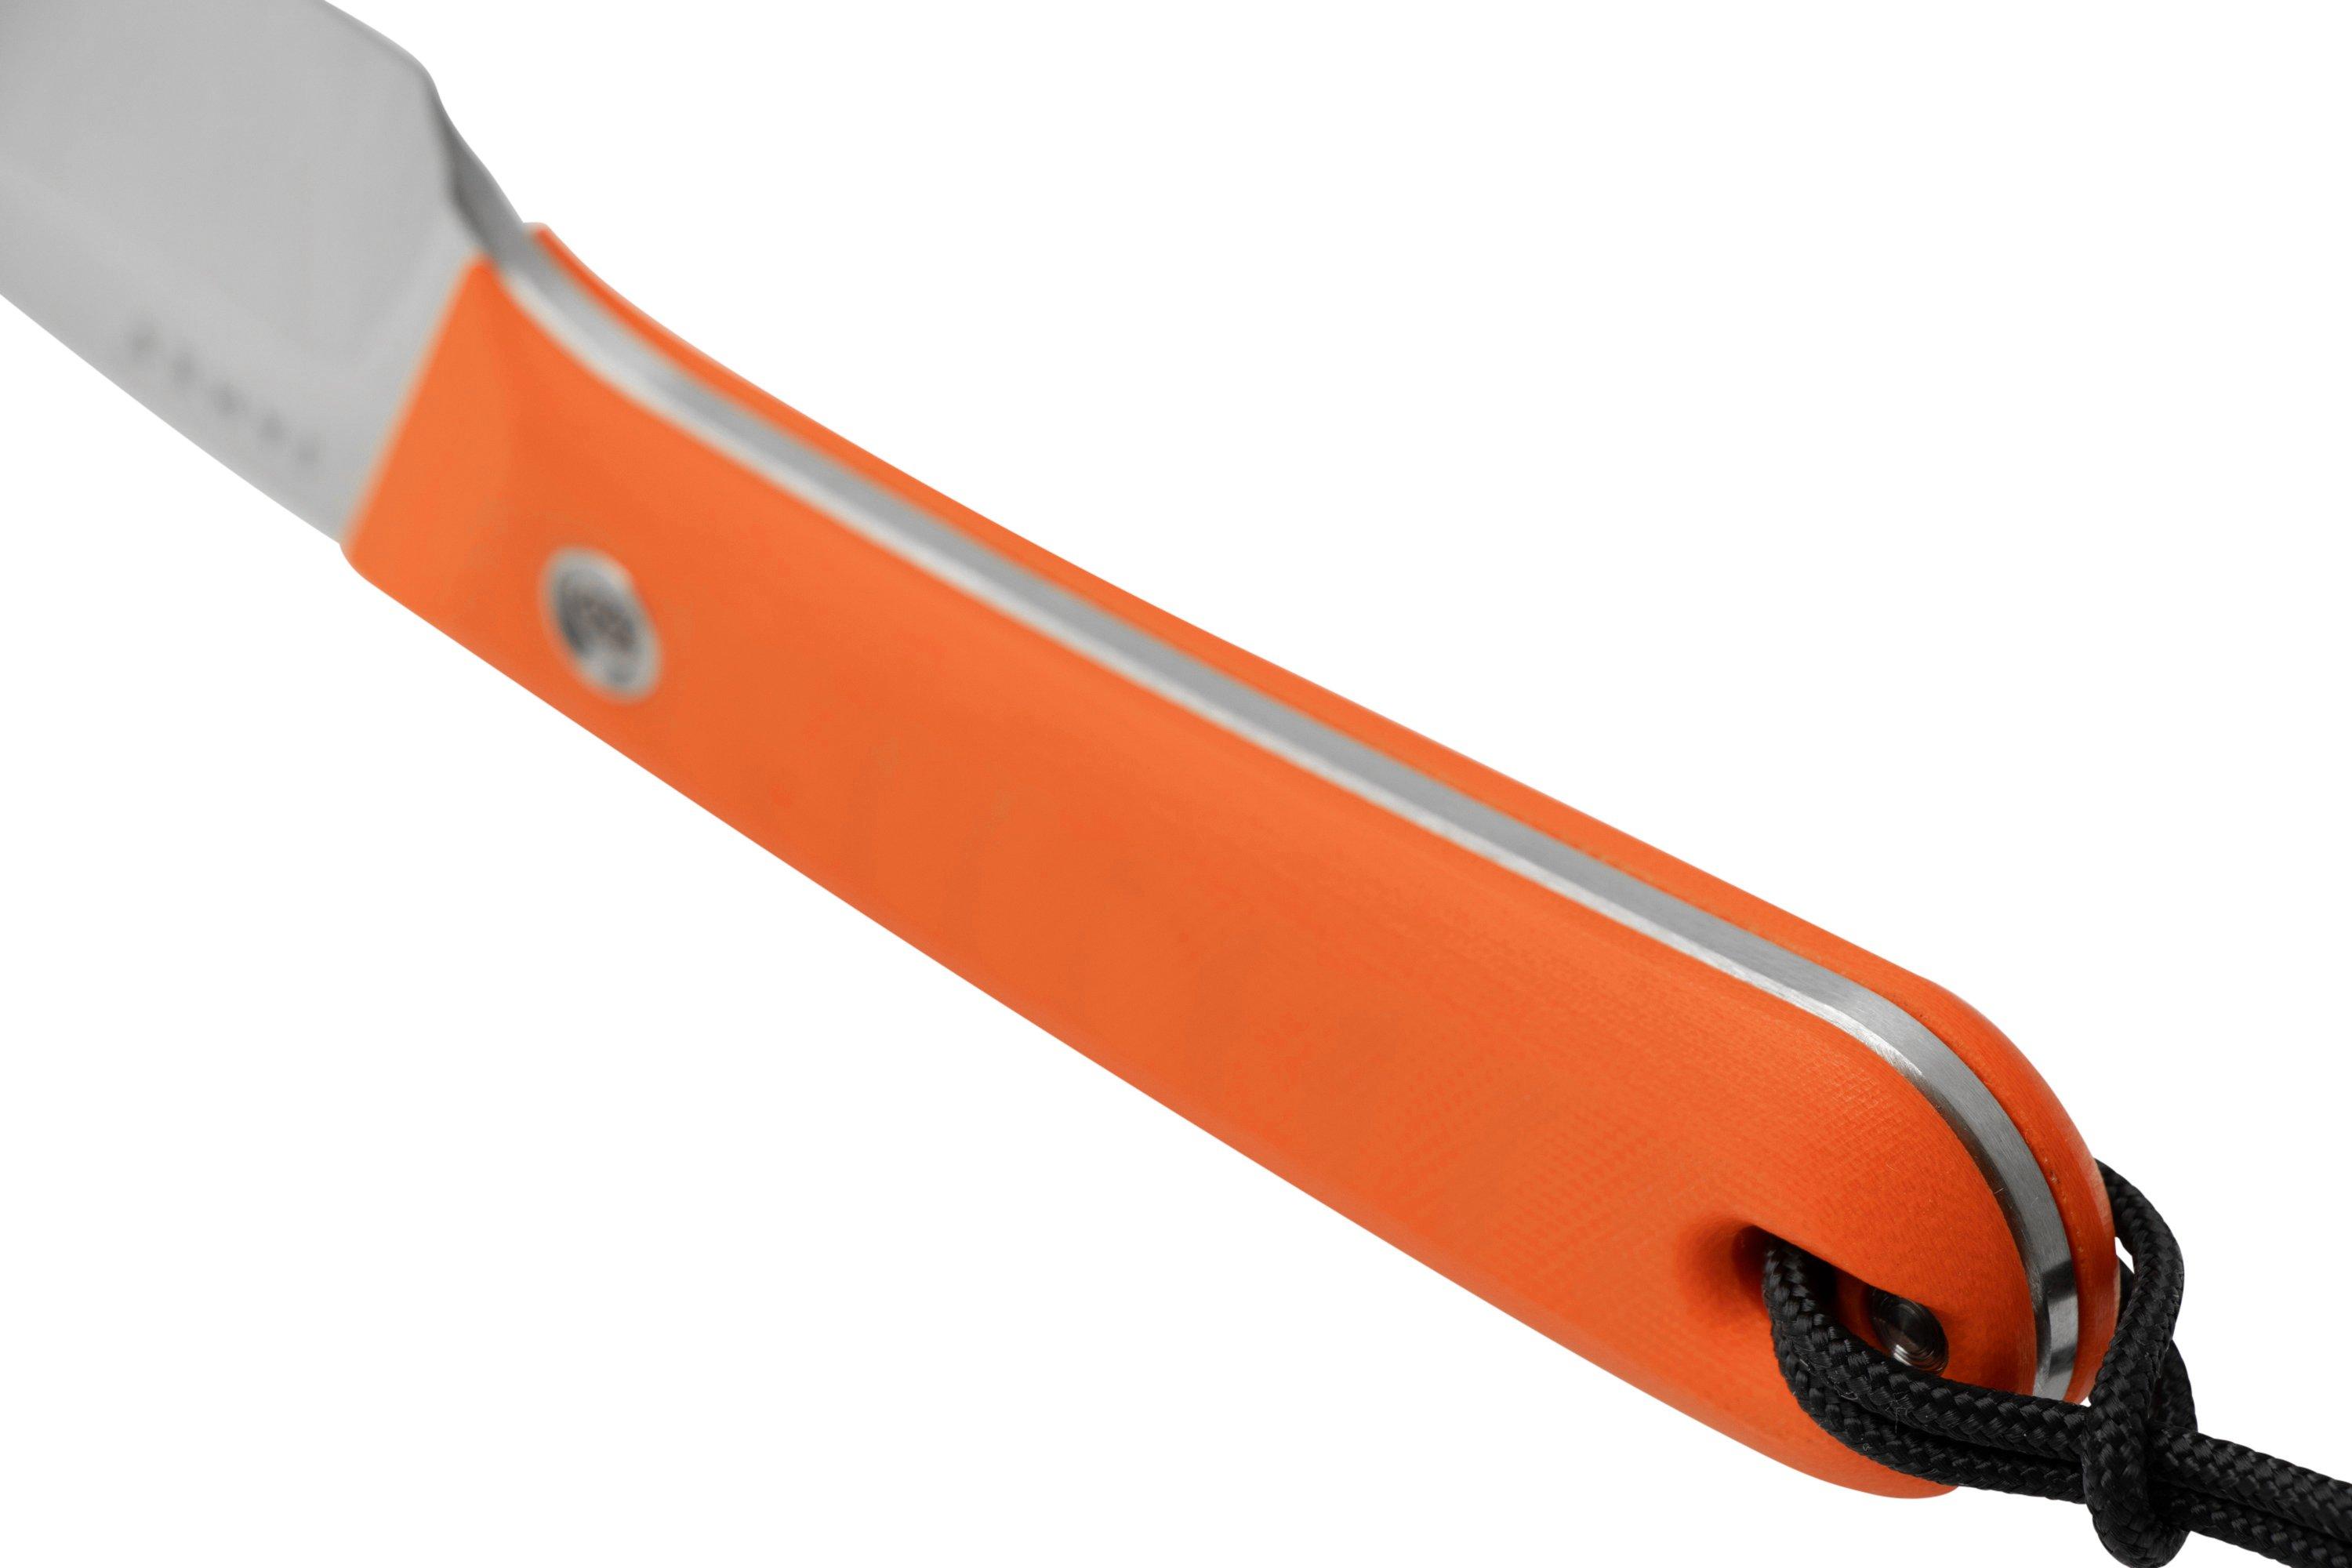 The Hell Gap Orange + Stainless by The James Brand